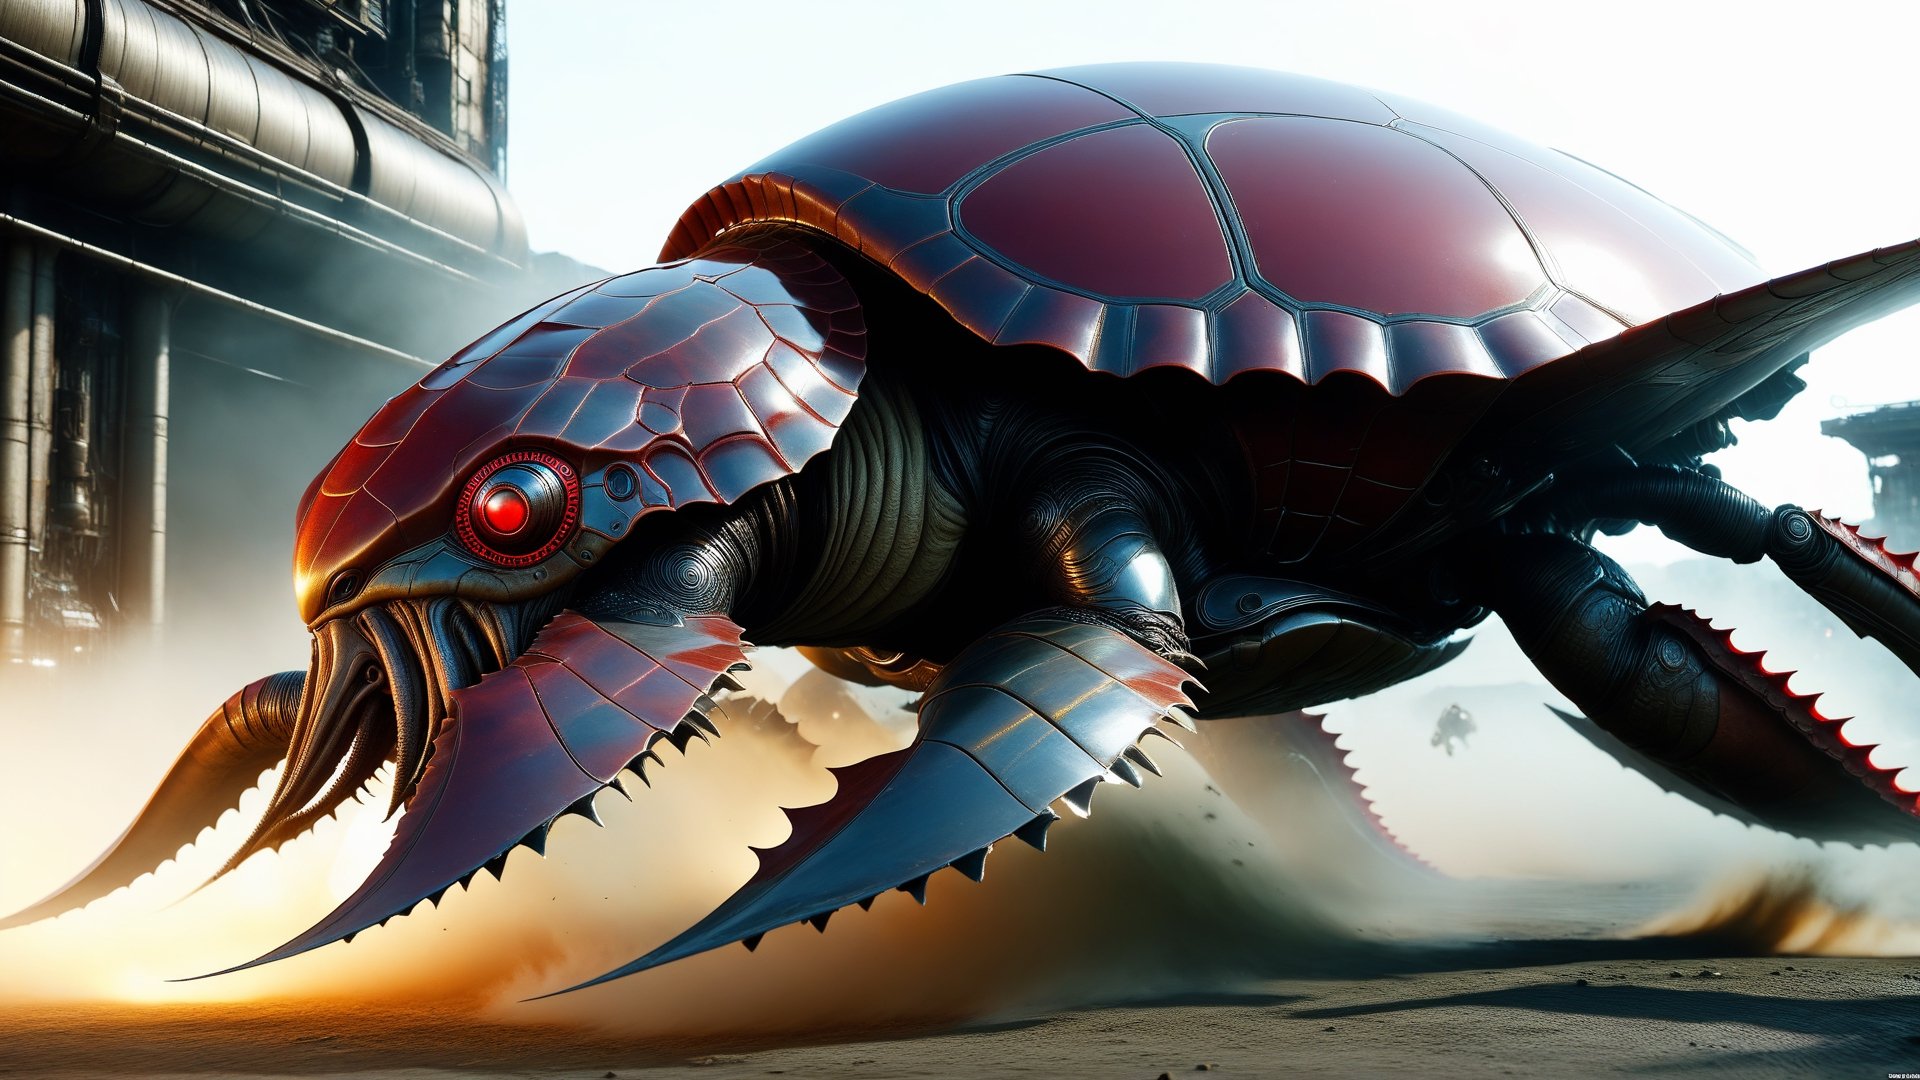 alien_airk_caraveldi_battle_mamut_octopus_ent_ikel_orc_turtle_steampunk_high-tech, futuristic:1.5, sci-fi:1.6, (light brown, light grey and red color:1.9), (full body:1.9), sophisticated, ufo, front view, ai, tech, unreal, luxurious, hyper strong armor, Advanced technology of a Type VI, epic high-tech futuristic city back ground

PNG image format, sharp lines and borders, solid blocks of colors, over 300ppp dots per inch, 32k ultra high definition, 530MP, Fujifilm XT3, cinematographic, (photorealistic:1.6), 4D, High definition RAW color professional photos, photo, masterpiece, realistic, ProRAW, realism, photorealism, high contrast, digital art trending on Artstation ultra high definition detailed realistic, detailed, skin texture, hyper detailed, realistic skin texture, facial features, armature, best quality, ultra high res, high resolution, detailed, raw photo, sharp re, lens rich colors hyper realistic lifelike texture dramatic lighting unrealengine trending, ultra sharp, pictorial technique, (sharpness, definition and photographic precision), (contrast, depth and harmonious light details), (features, proportions, colors and textures at their highest degree of realism), (blur background, clean and uncluttered visual aesthetics, sense of depth and dimension, professional and polished look of the image), work of beauty and complexity. perfectly symmetrical body.

(aesthetic + beautiful + harmonic:1.5), (ultra detailed face, ultra detailed eyes, ultra detailed mouth, ultra detailed body, ultra detailed hands, ultra detailed clothes, ultra detailed background, ultra detailed scenery:1.5),

3d_toon_xl:0.8, JuggerCineXL2:0.9, detail_master_XL:0.9, detailmaster2.0:0.9, perfecteyes-000007:1.3,monster,biopunk style,zhibi,DonM3l3m3nt4lXL,alienzkin,moonster,Leonardo Style, ,DonMN1gh7D3m0nXL,aw0k illuminate,silent hill style,Magical Fantasy style,DonMCyb3rN3cr0XL ,cyborg style,c1bo, soil element,cyberpunk style,cyberpunk,mecha,kawaiitech,nhdsrmr,chhdsrmr,alien_woman,biopunk,darkart,glitter,shiny,Gill_man,DonMM4g1cXL 